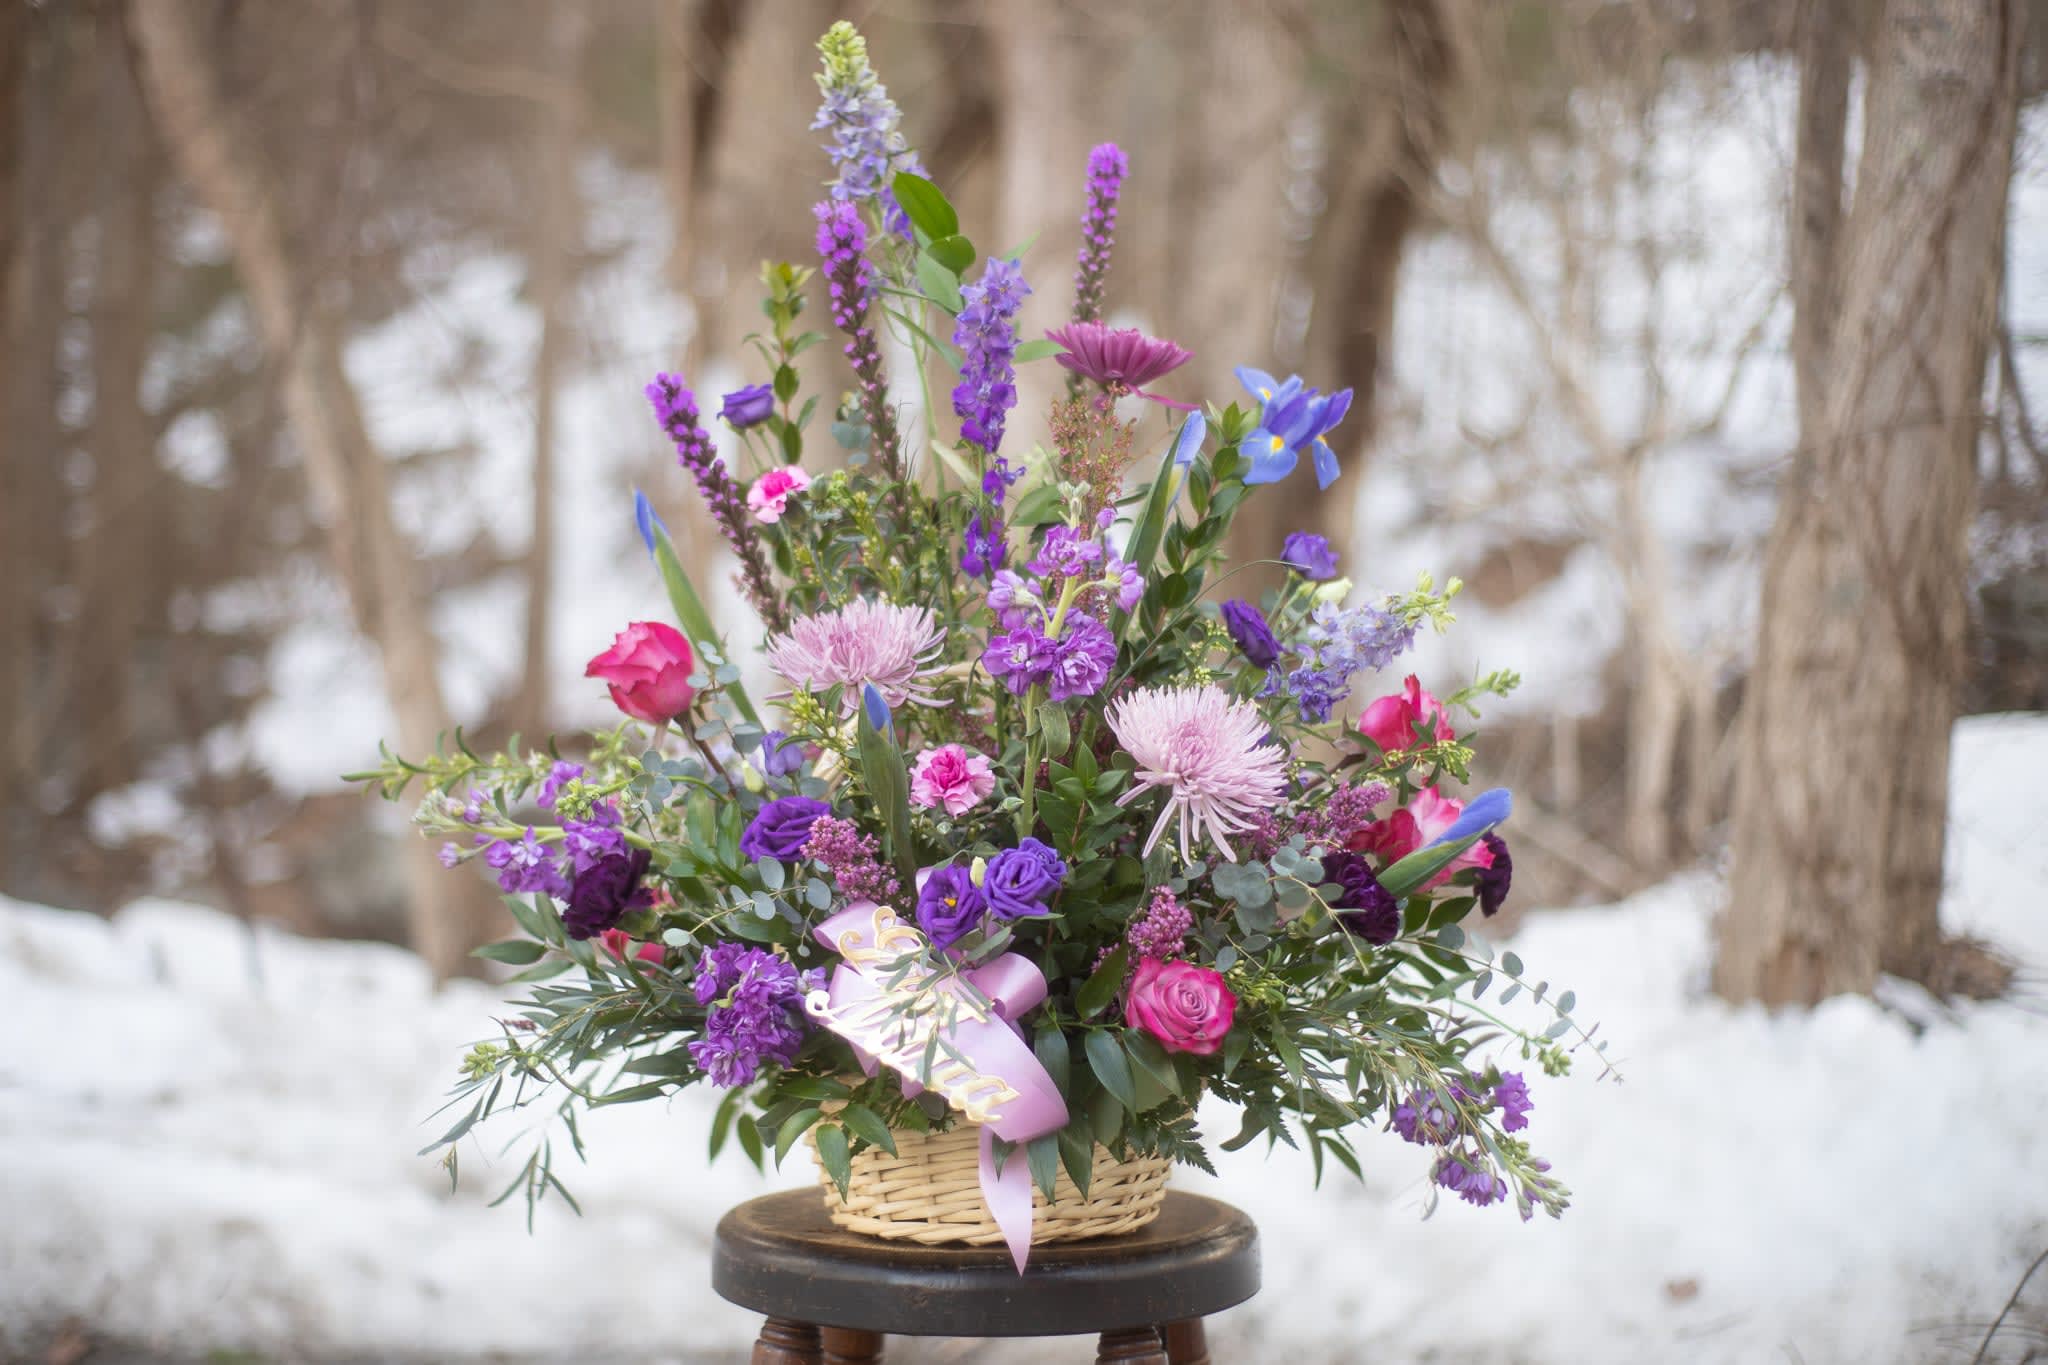 Lavender Garden Basket - Wildflower inspired floral tribute basket in lovely lavender, indigo and purple tones traditionally designed in a one sided fashion to display beautifully in the funeral parlor or at a graveside service. Tall and airy larkspur blooms in a violet hue embrace the garden spirit alongside towering liatris blooms. Focal flowers of roses and cremons create a graceful display of love and admiration. Metallic gold script is available for all floral memorial tribute pieces. Basket styles and colors may vary from photo. Standard price is displayed in photo. Can be created in a multitude of color palettes if desired. 